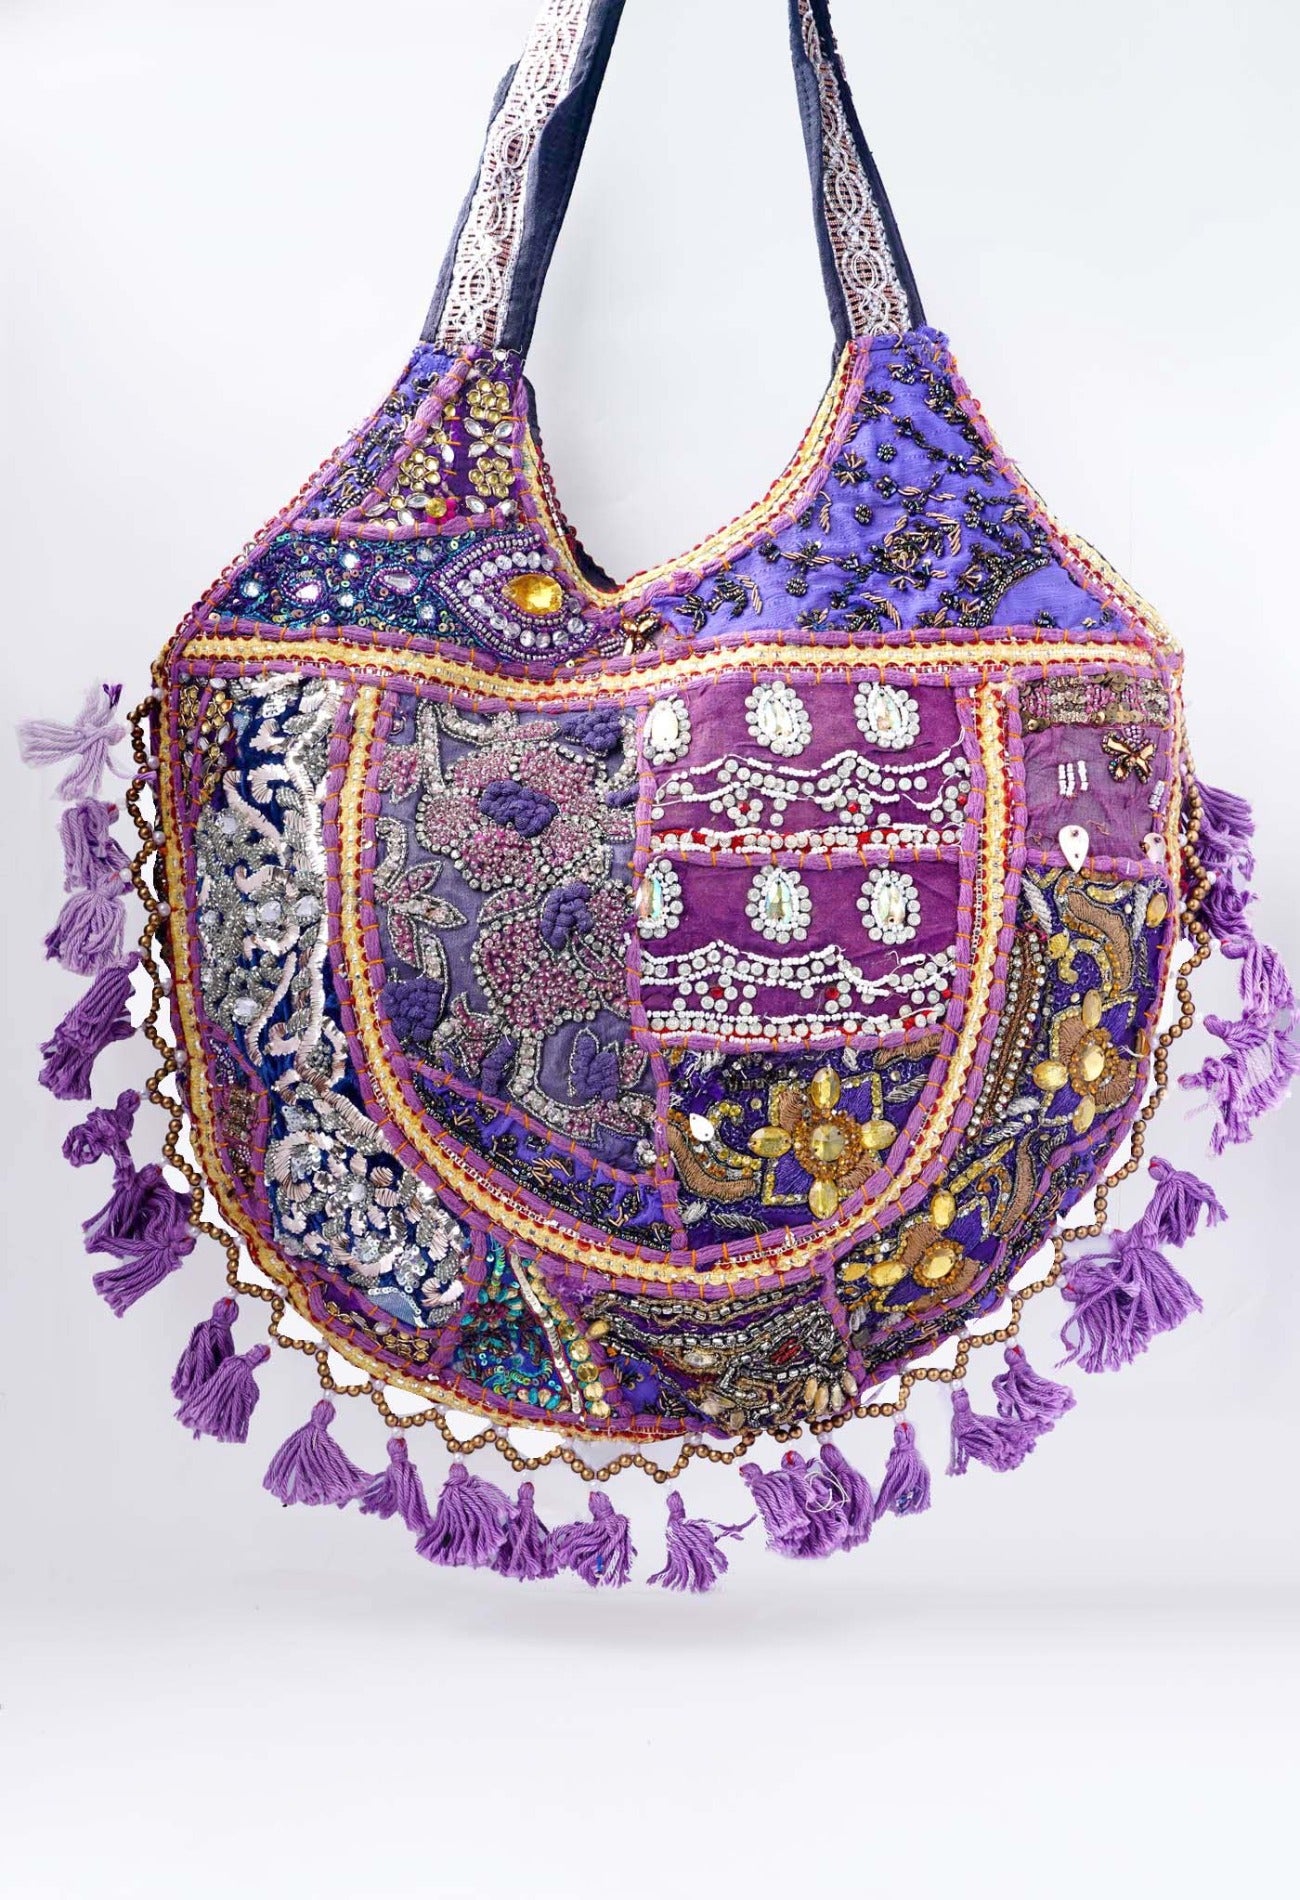 Online Shopping for Purple  Indian Handicraft Embroidered Hand Bag with Weaving from Rajasthan at Unnatisilks.com India_x000D_
Online Shopping for Purple  Indian Handicraft Embroidered Hand Bag with Weaving from Rajasthan at Unnatisilks.com India_x000D_
Online Shopping for Purple  Indian Handicraft Embroidered Hand Bag with Weaving from Rajasthan at Unnatisilks.com India_x000D_
Online Shopping for Purple  Indian Handicraft Embroidered Hand Bag with Weaving from Rajasthan at Unnatisilks.com India_x000D_
